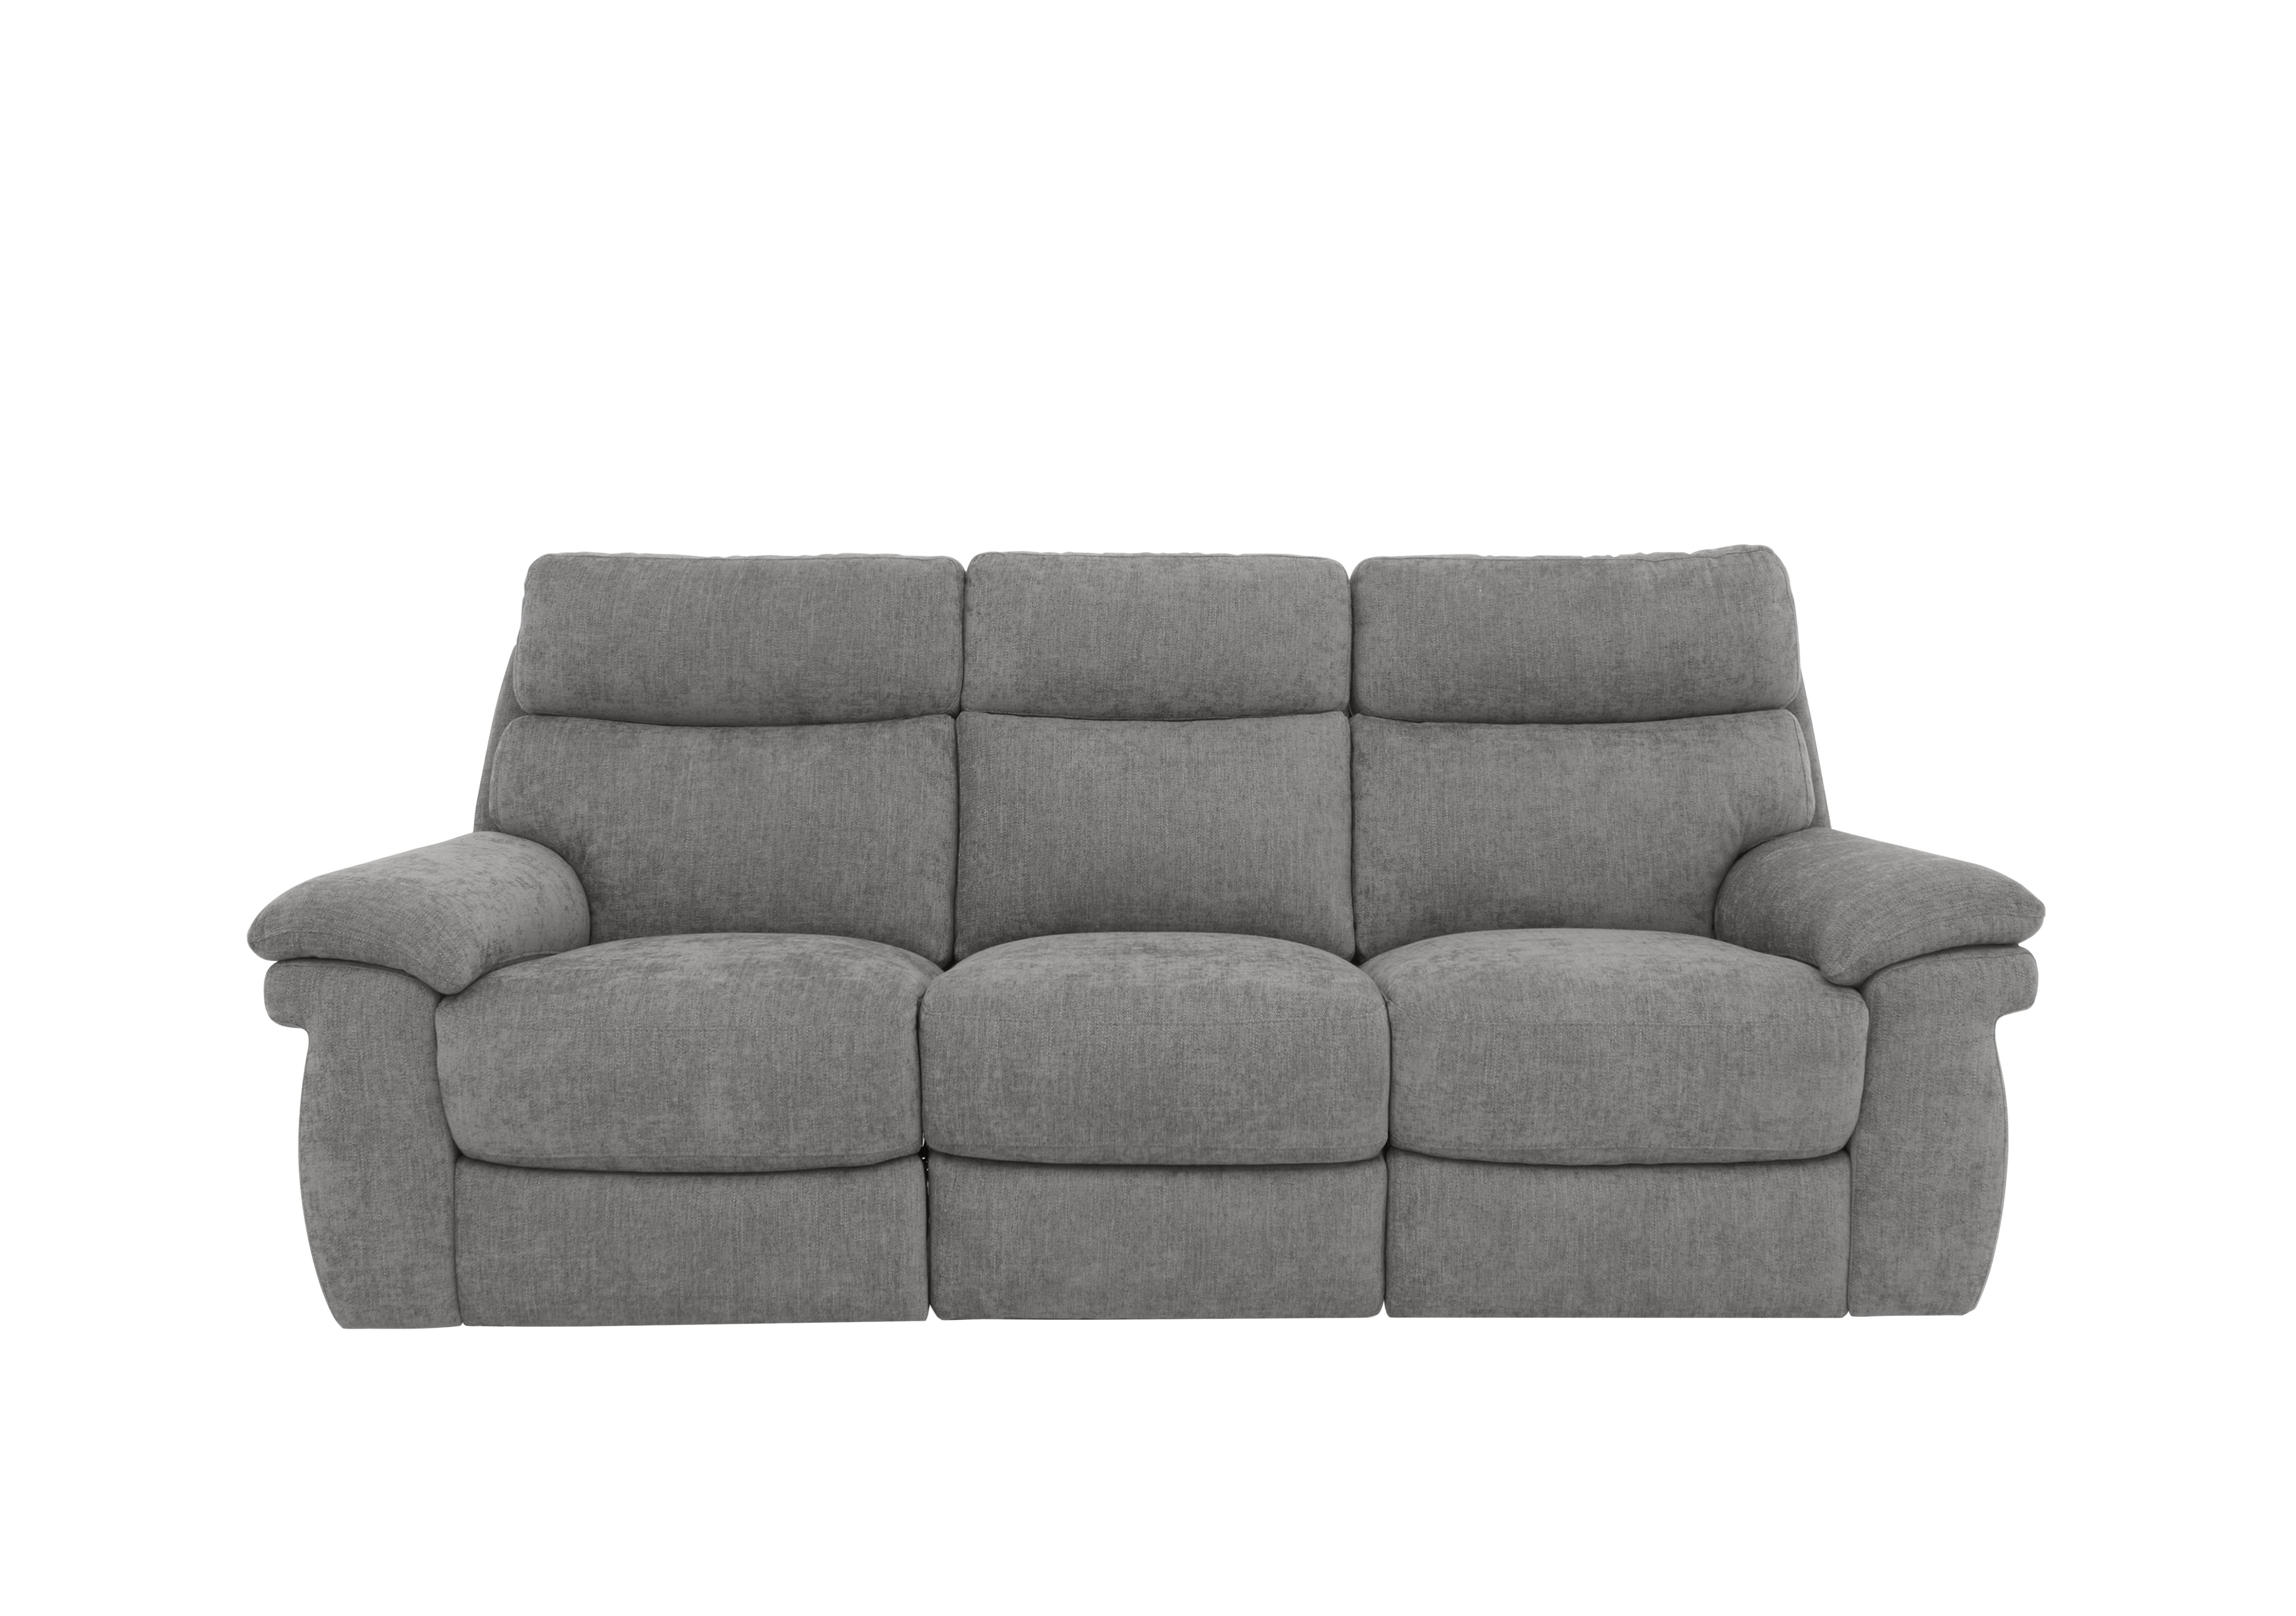 Serene 3 Seater Fabric Power Recliner Sofa with Power Headrests in Fab-Meo-R24 Haze on Furniture Village